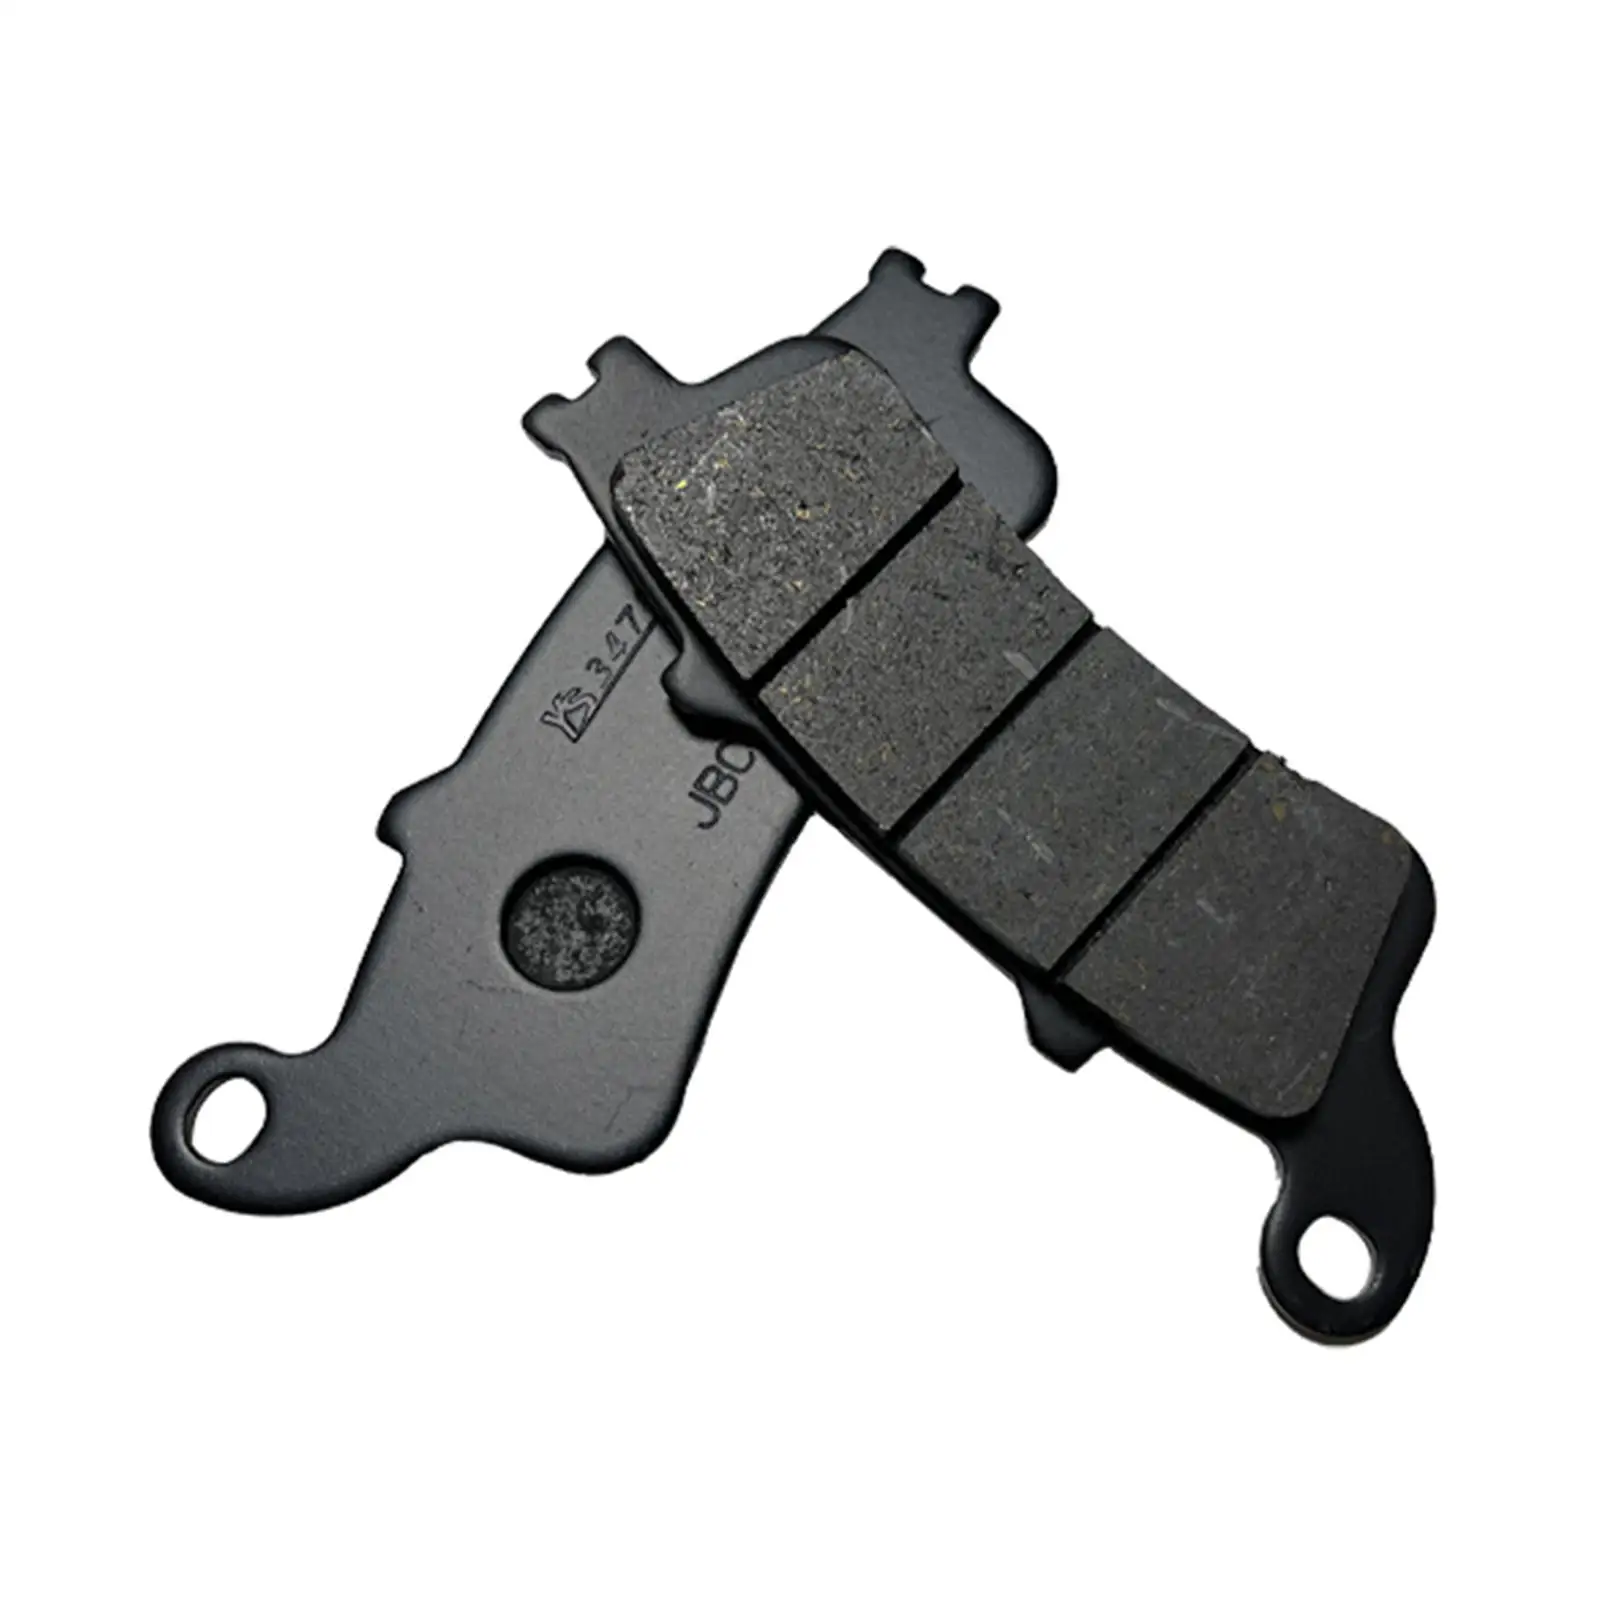 

Front and Rear Brake Pads Easy Installation Direct Replace Convenient Compact Black Accessory Universal Fit for Kawasaki Kl